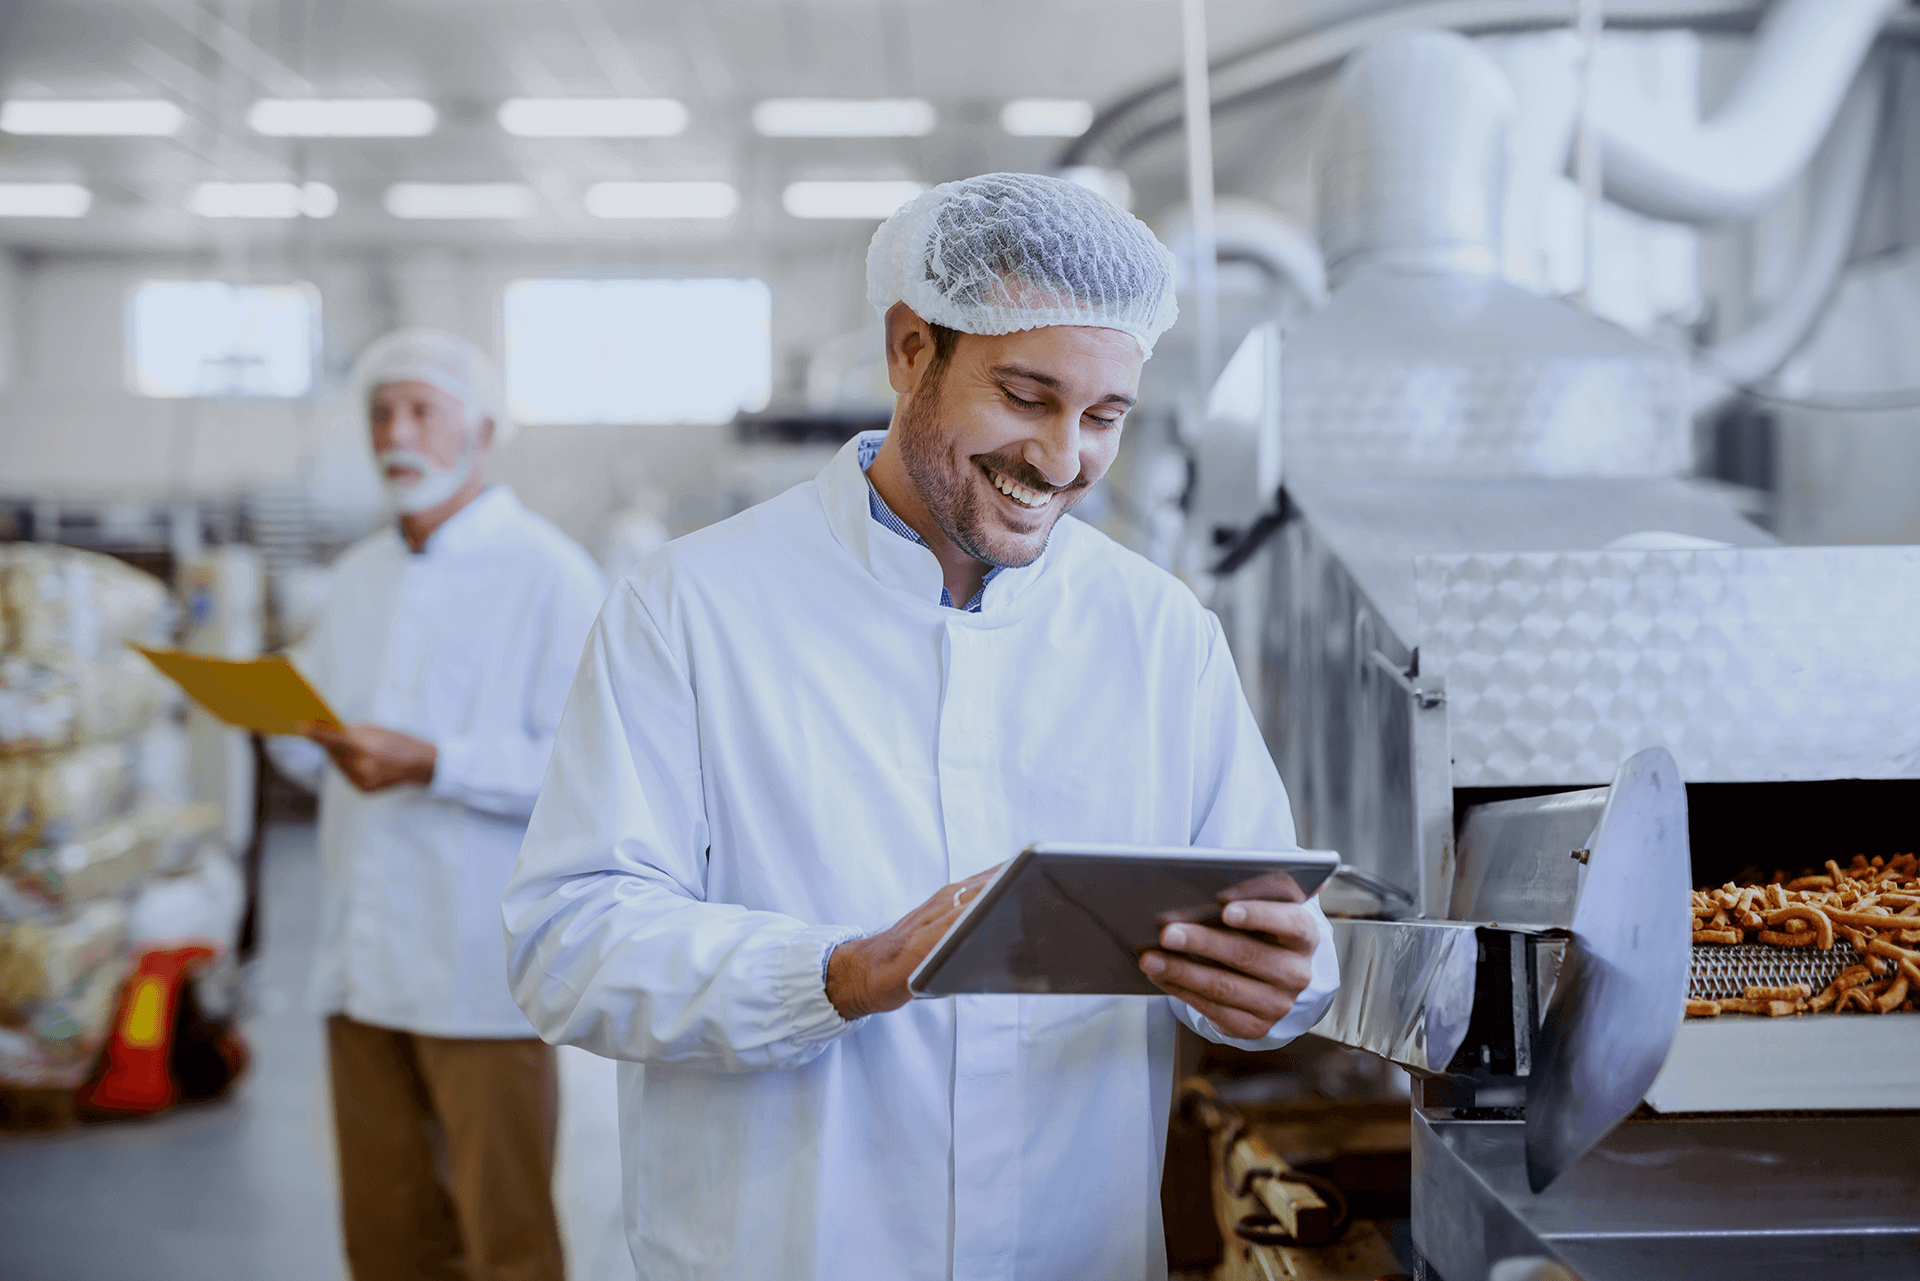 Worker in the Food Processing Industry Wearing Hair Net and Smiling